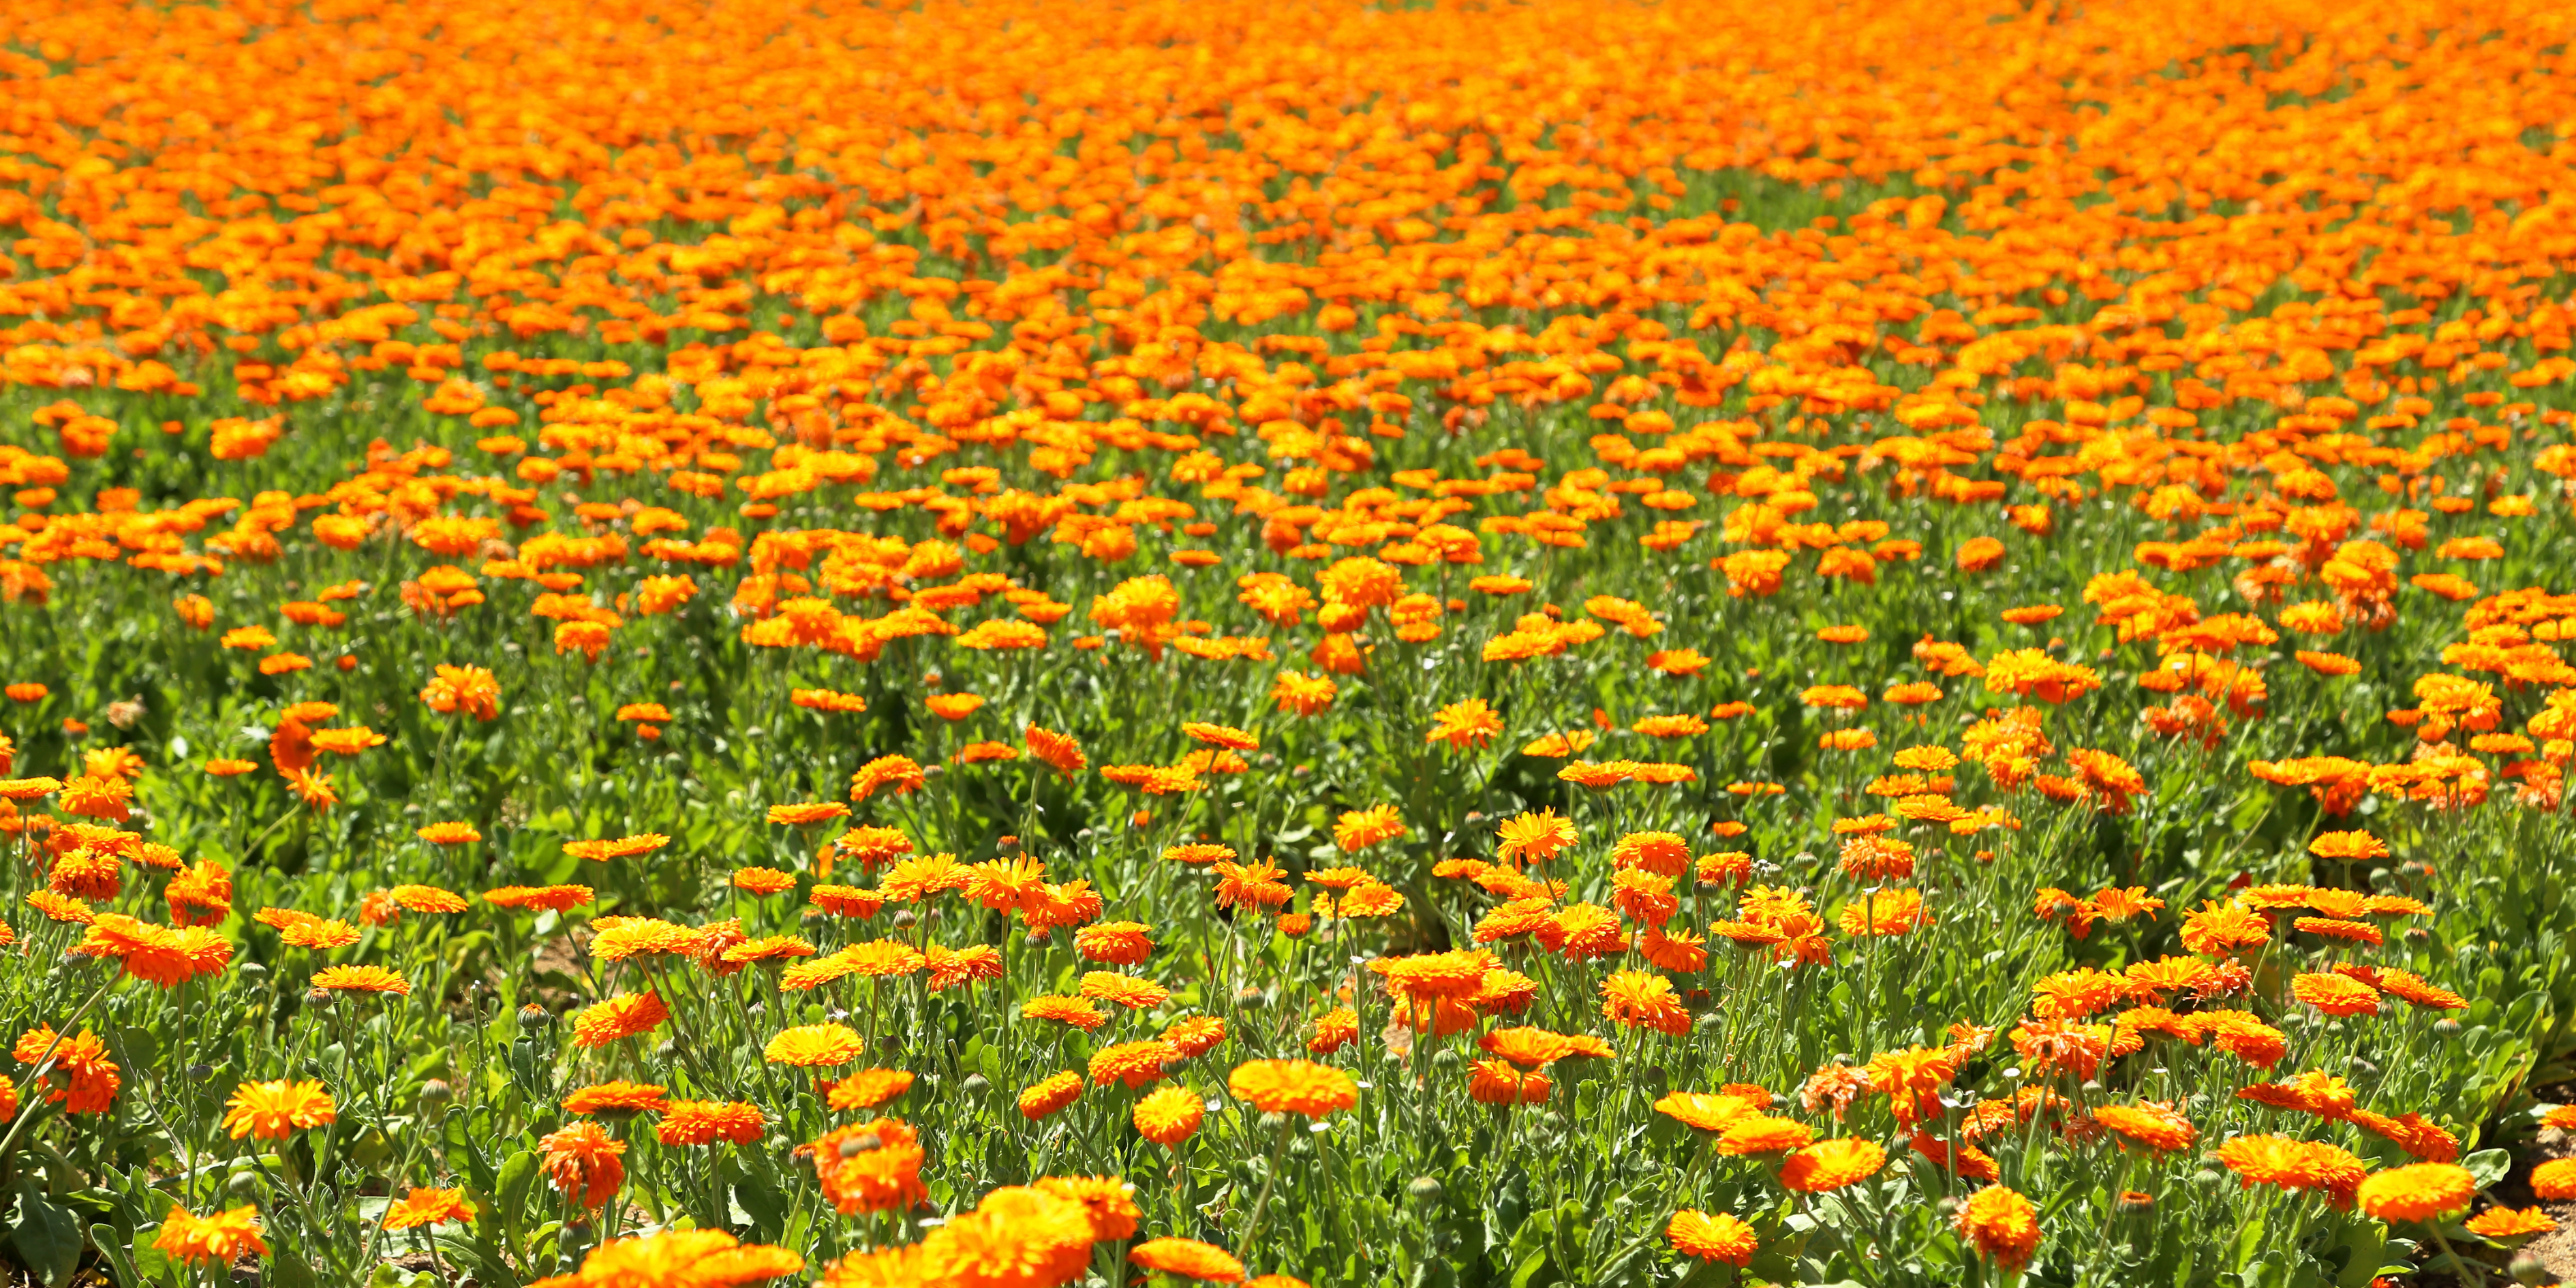 Calendula: What is it and why do I need it?